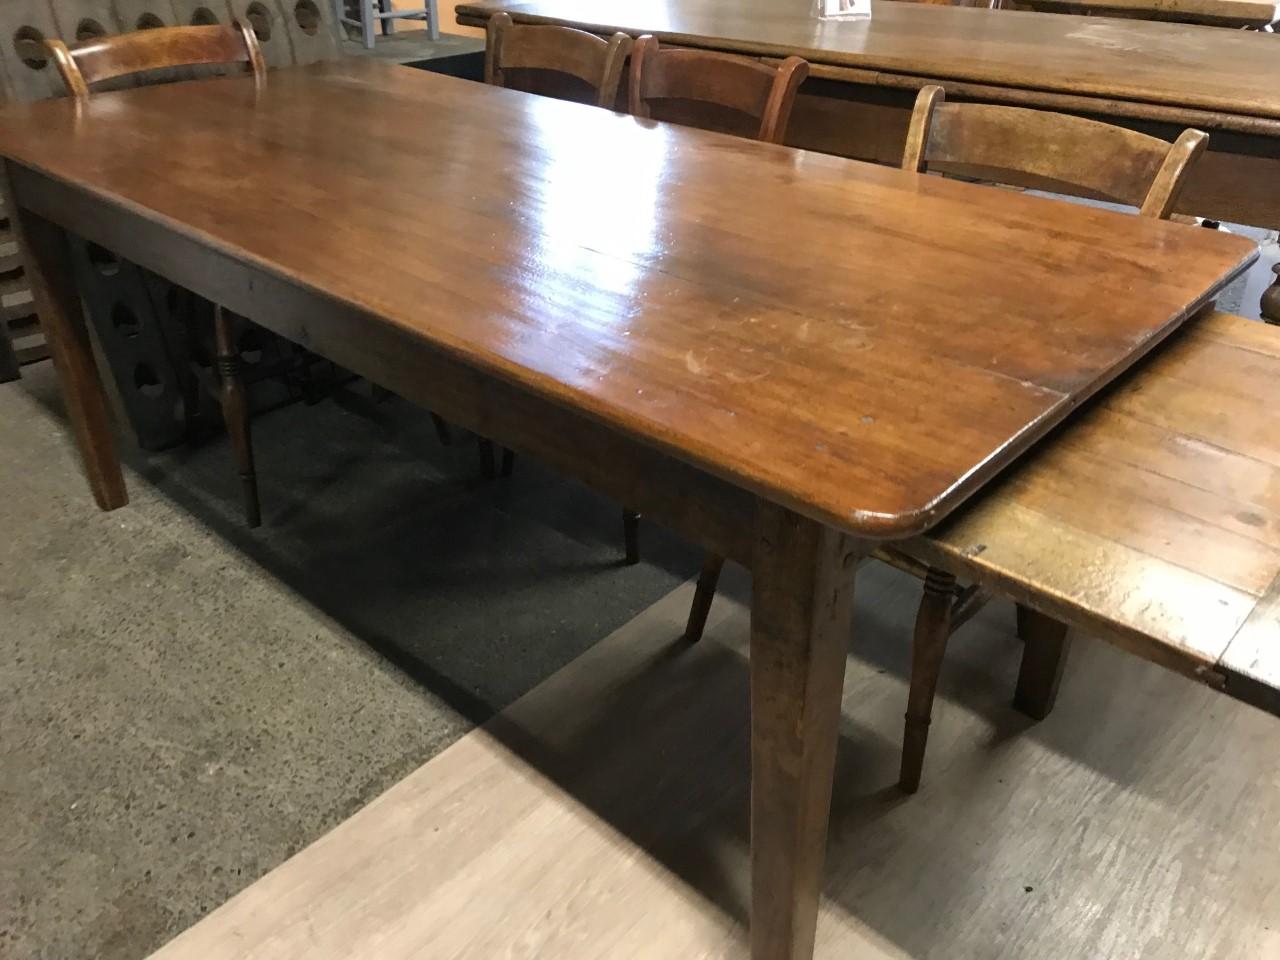 European 19th Century Cherry Dining Table with Bread Slide and One Drawer